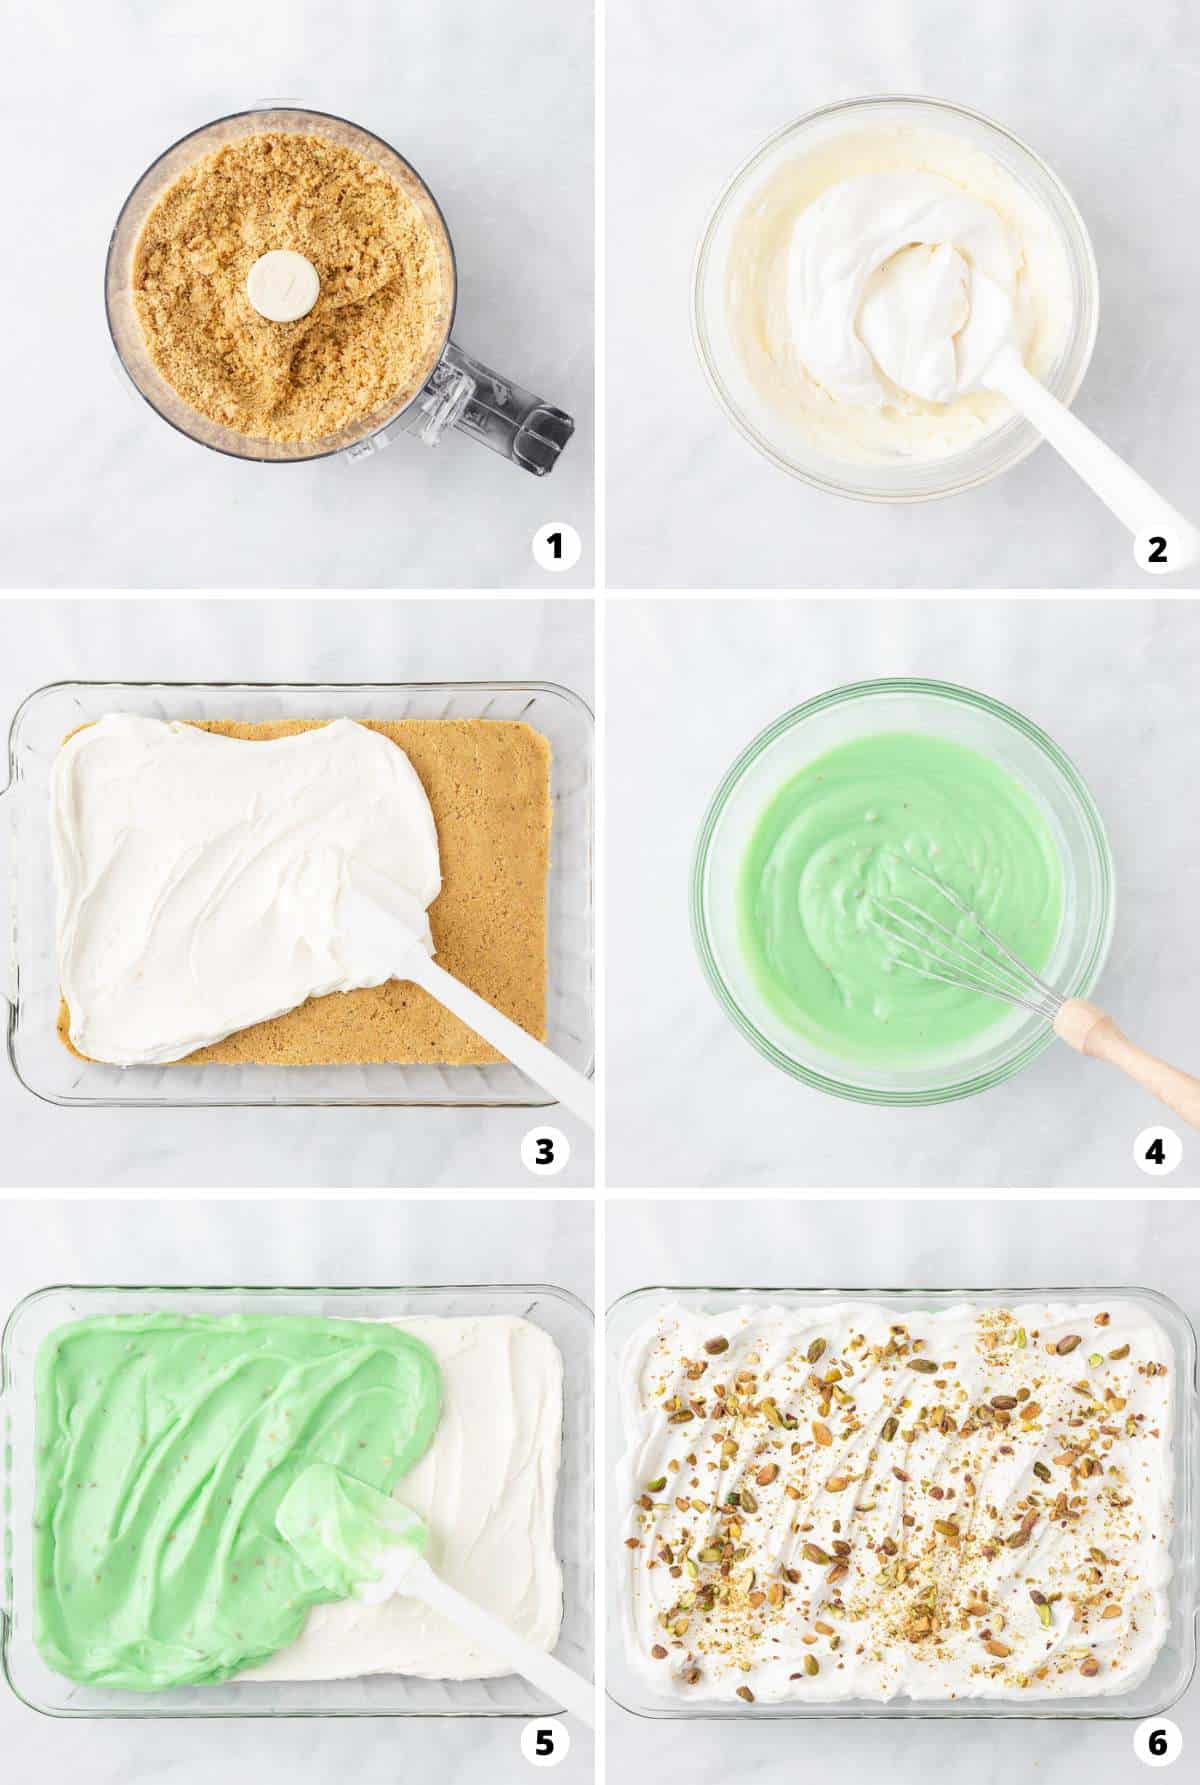 Showing how to make pistachio dessert in a 6 step collage.